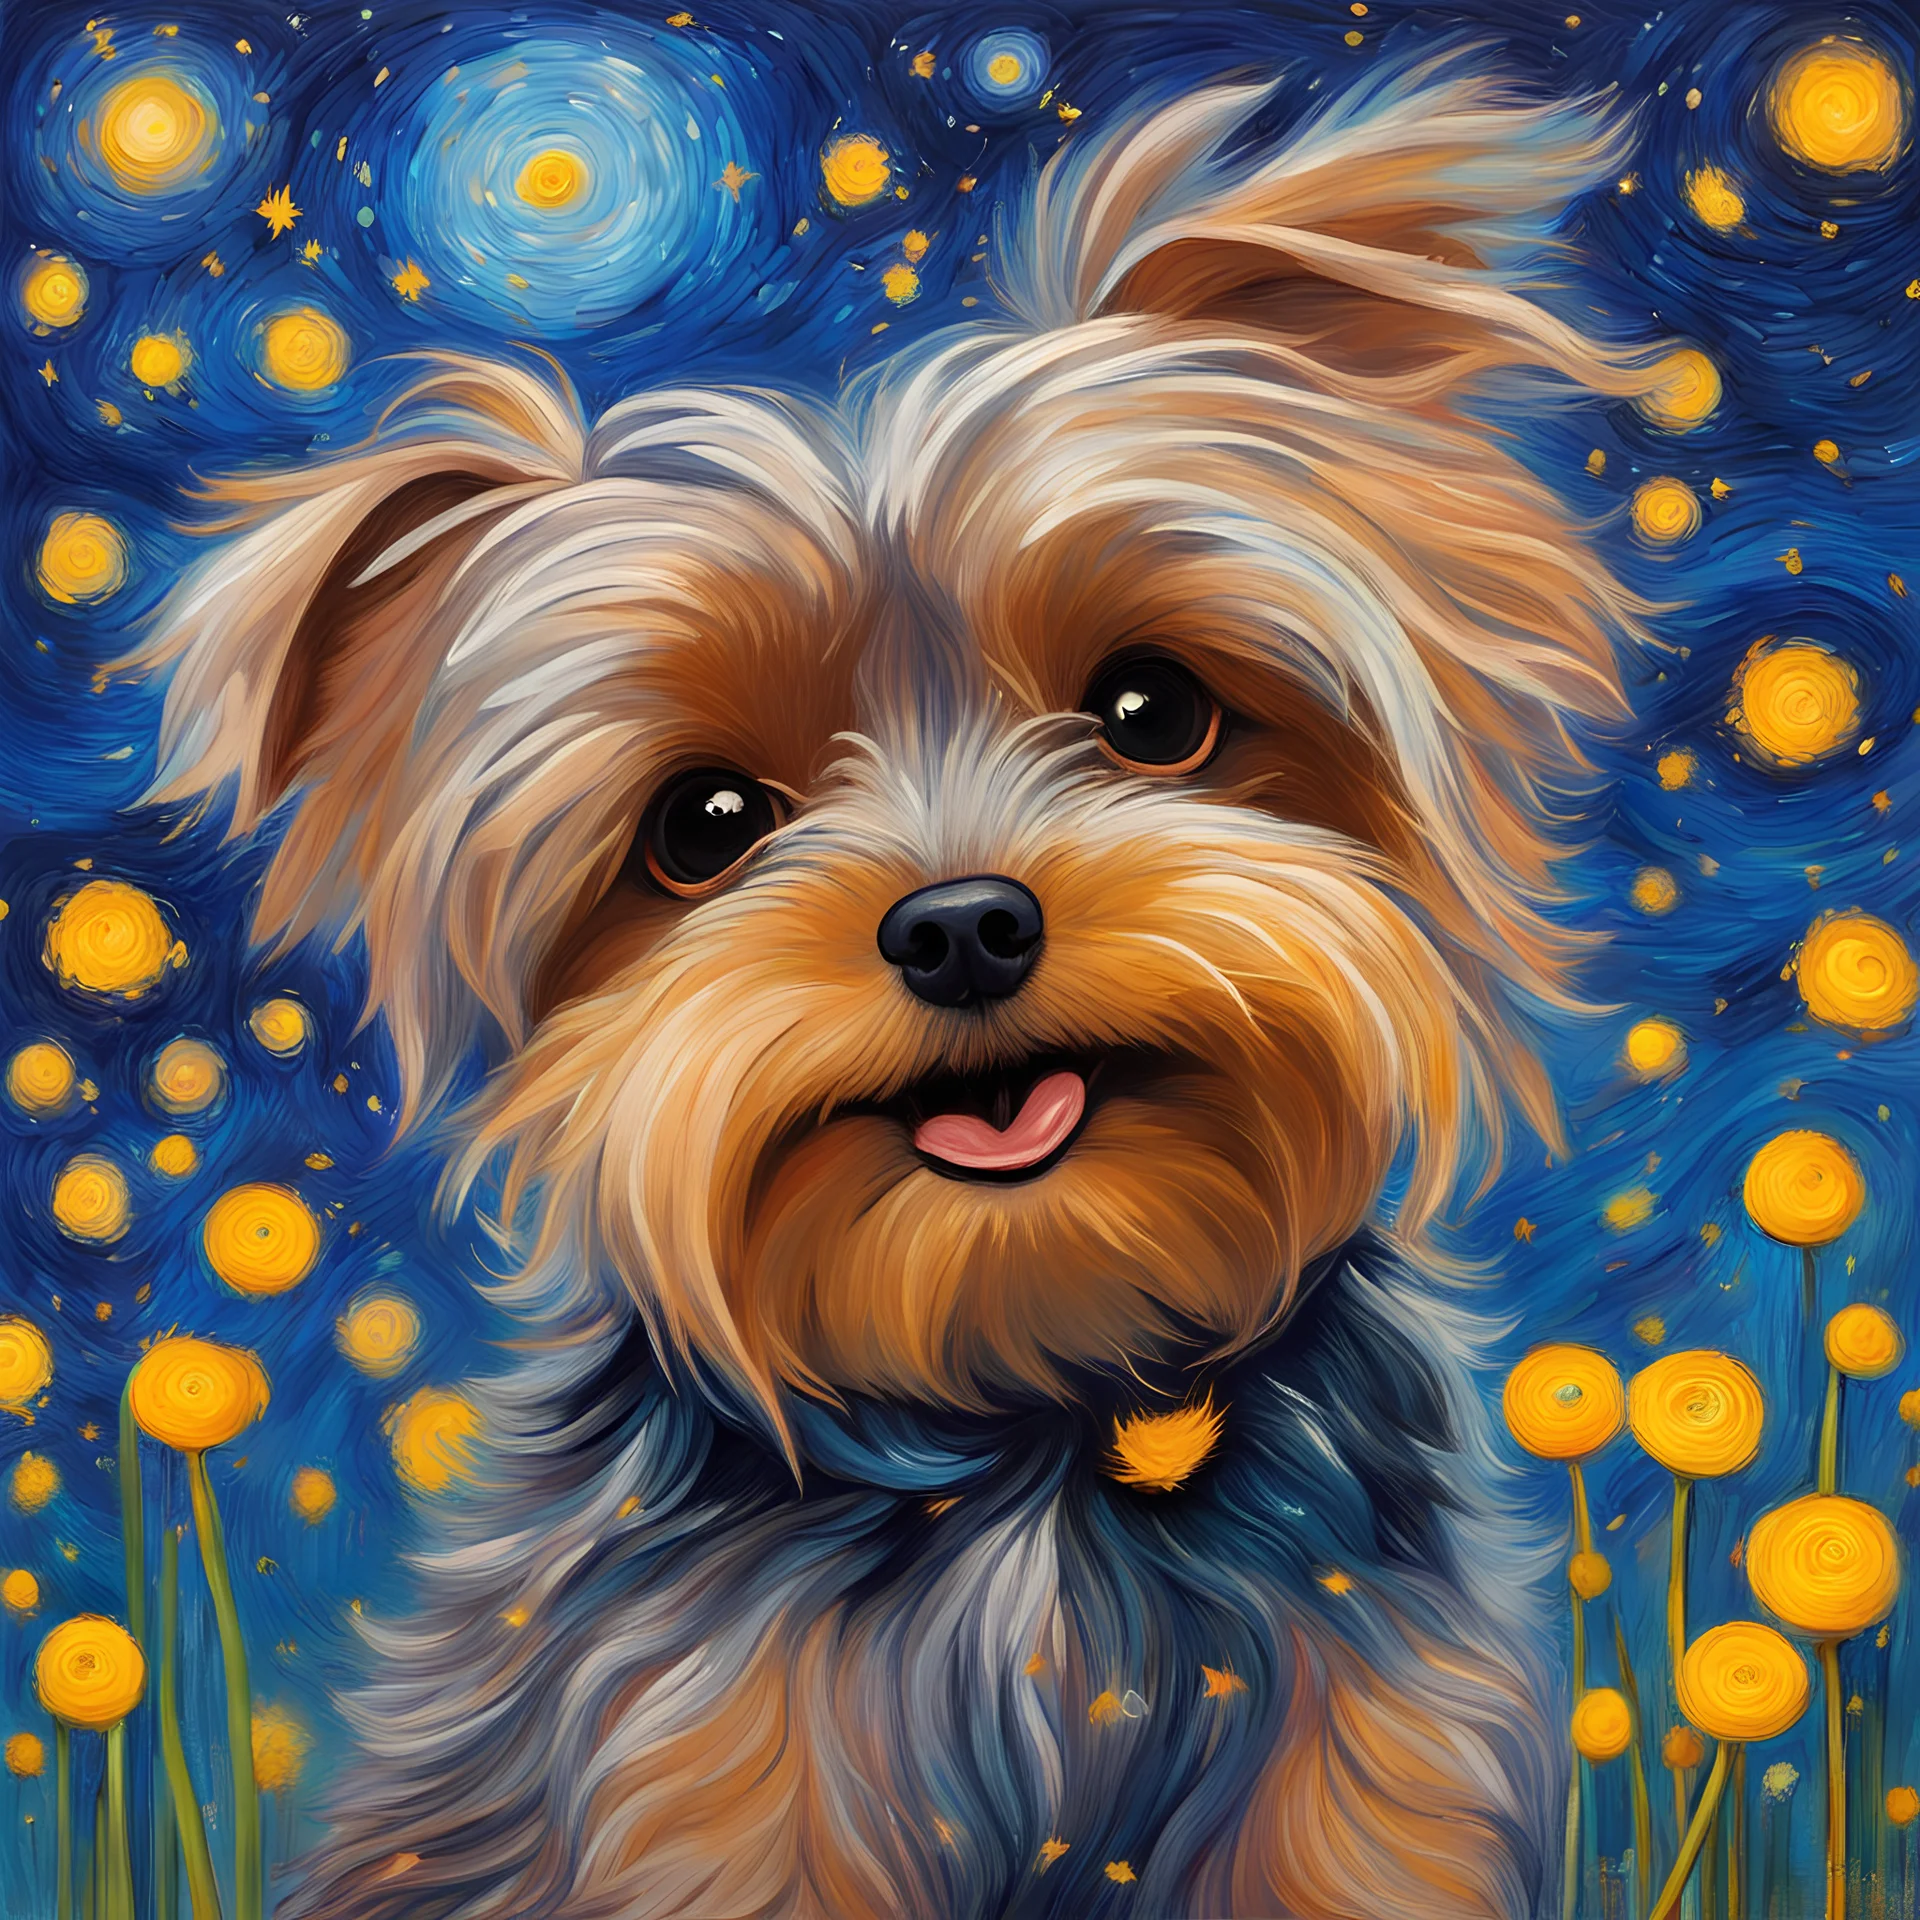 A painting of a cartoon Yorkie portrait in the style of Vincent van Gogh the starry night, thick paint, big brushstrokes; fresh vibrant graffiti oil painting art image; watching dandelion seeds in the wind, alcohol inks, chalks, oil pant, glitter, mixed media;fresh color;random color Zentangle patterns in the styles of Gustav Klimt, Wassily Kandinsky, Paul Klee, and Kay Nielsen that depicts a remote autumn forest glade, with fine in